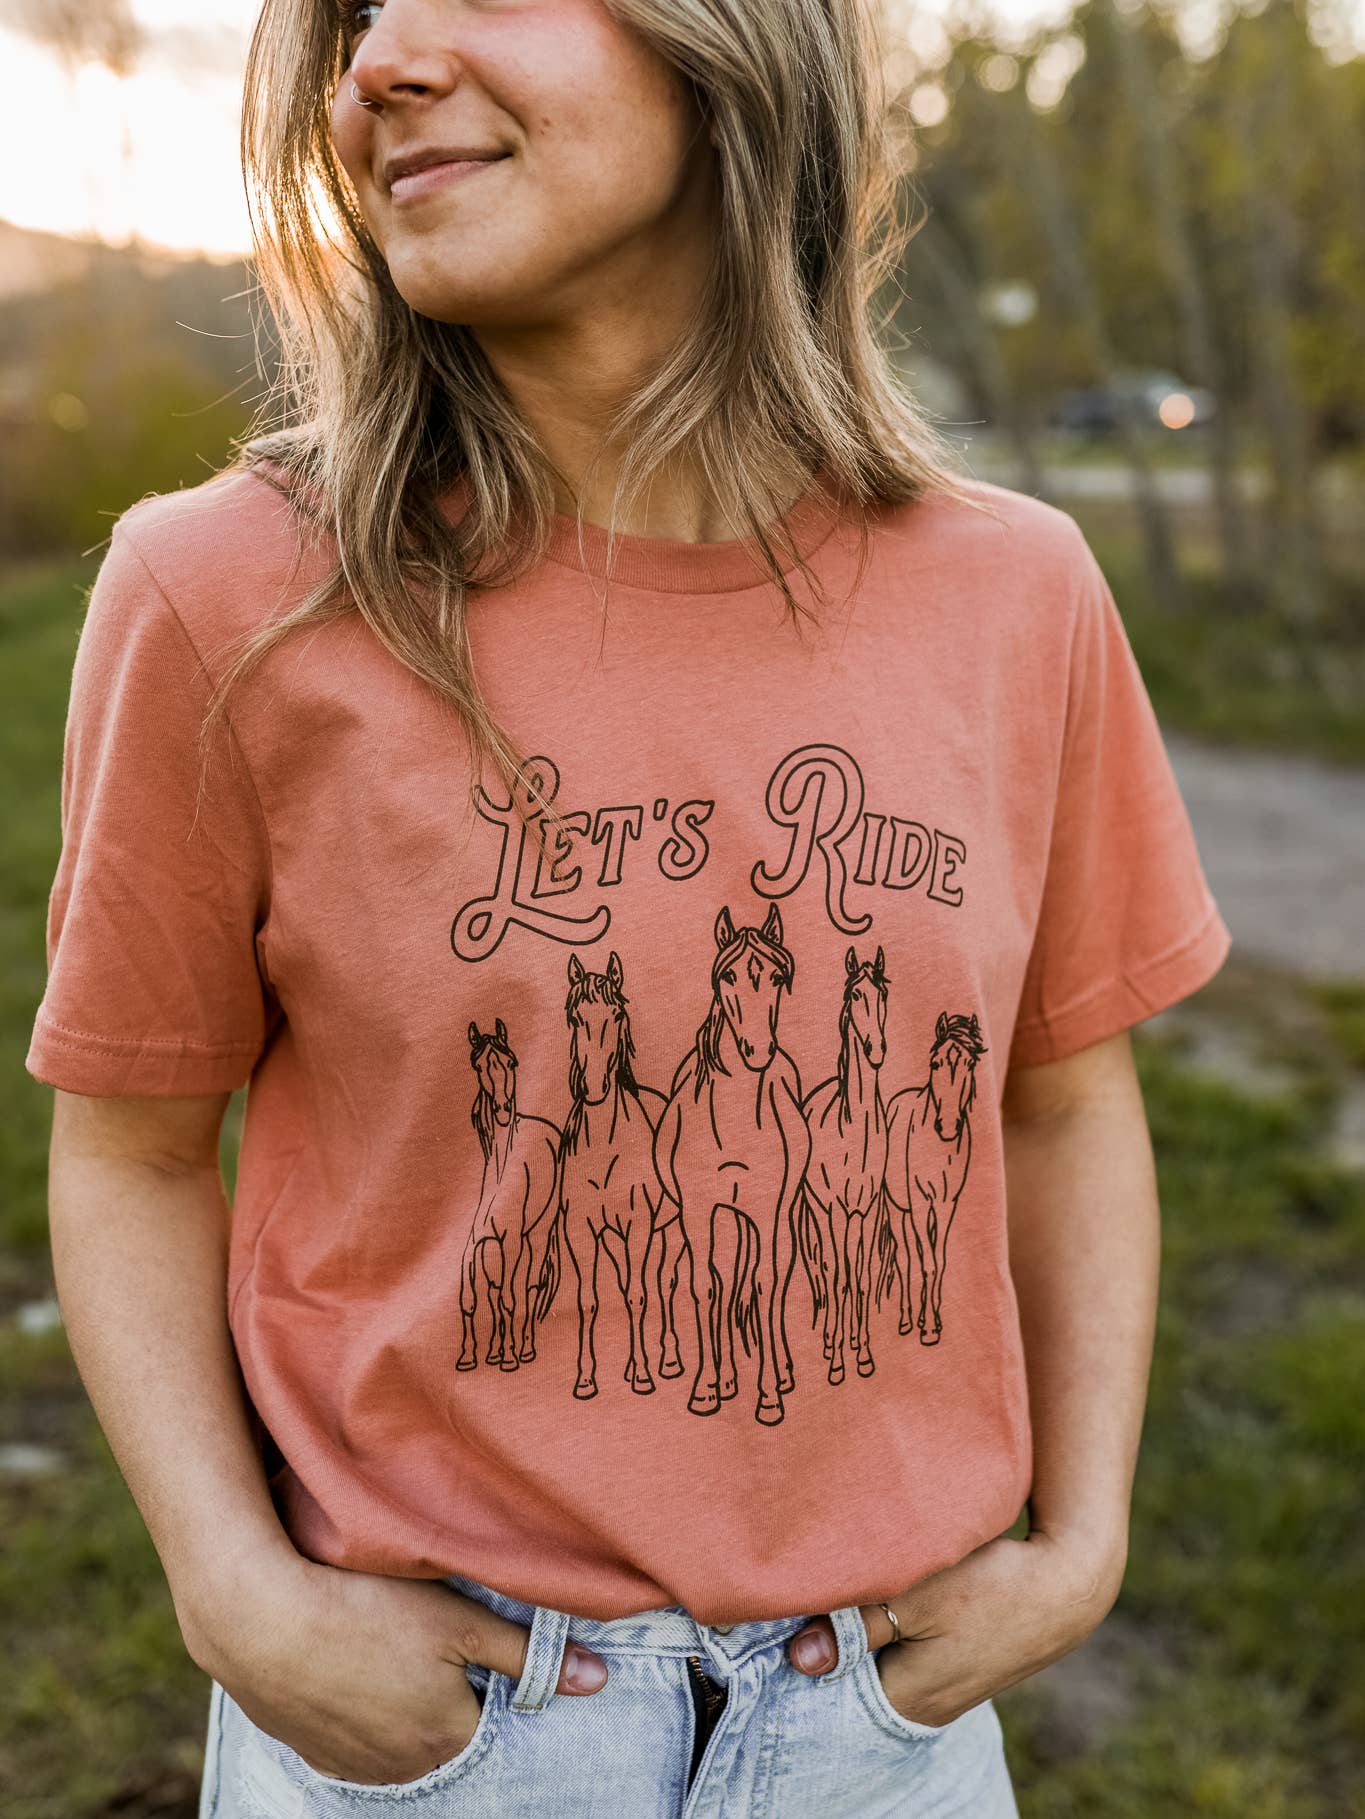 Terracotta t-shirt with "let's ride" in black lettering. 5 wild horses in black underneath